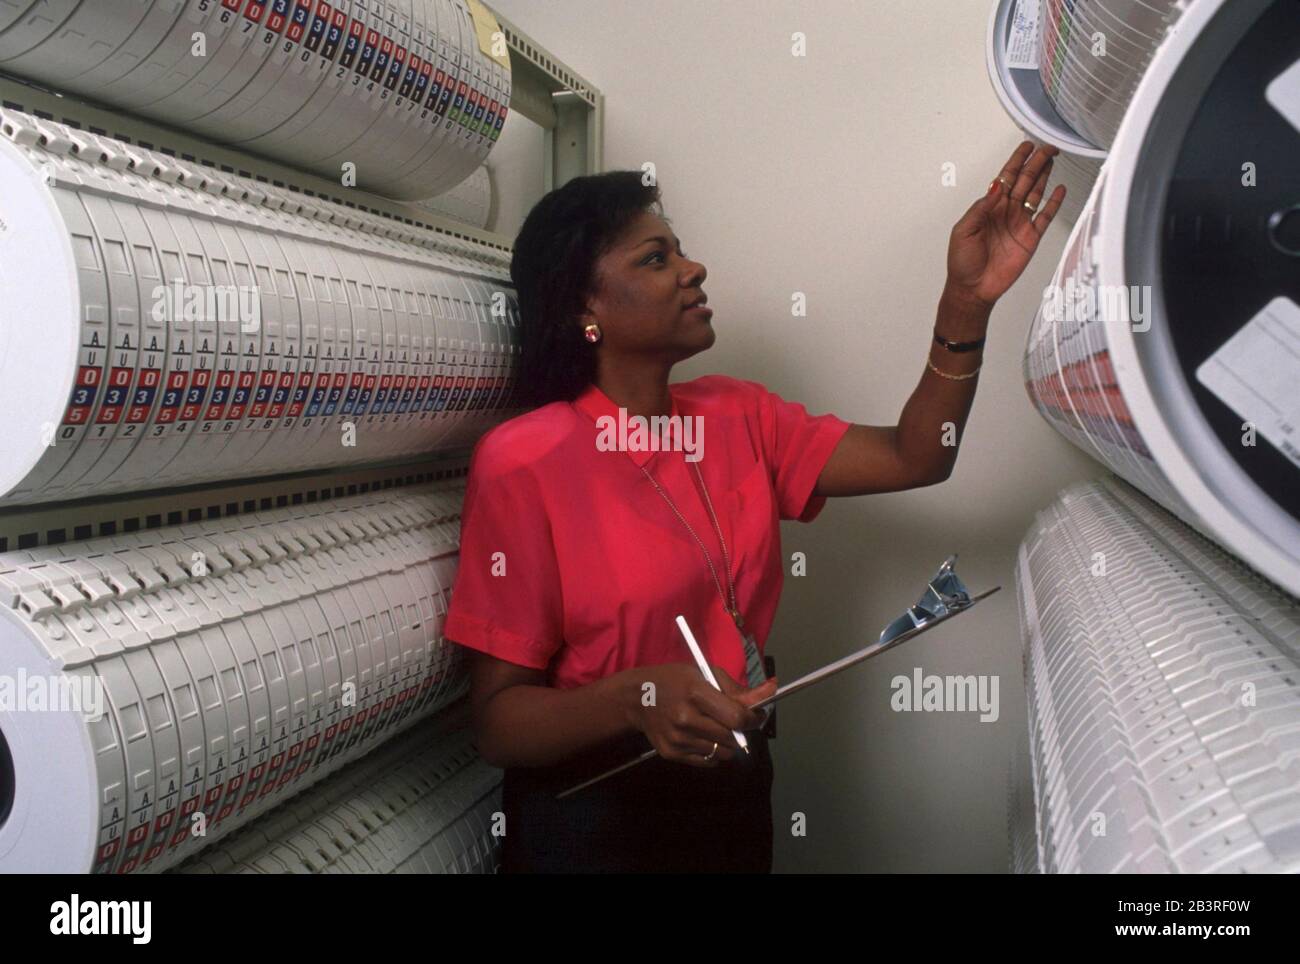 Austin Texas USA, 1990: Black female clerk looks at racks of magnetic tapes storing data compiled at the United States Census regional data processing center. ©Bob Daemmrich Stock Photo